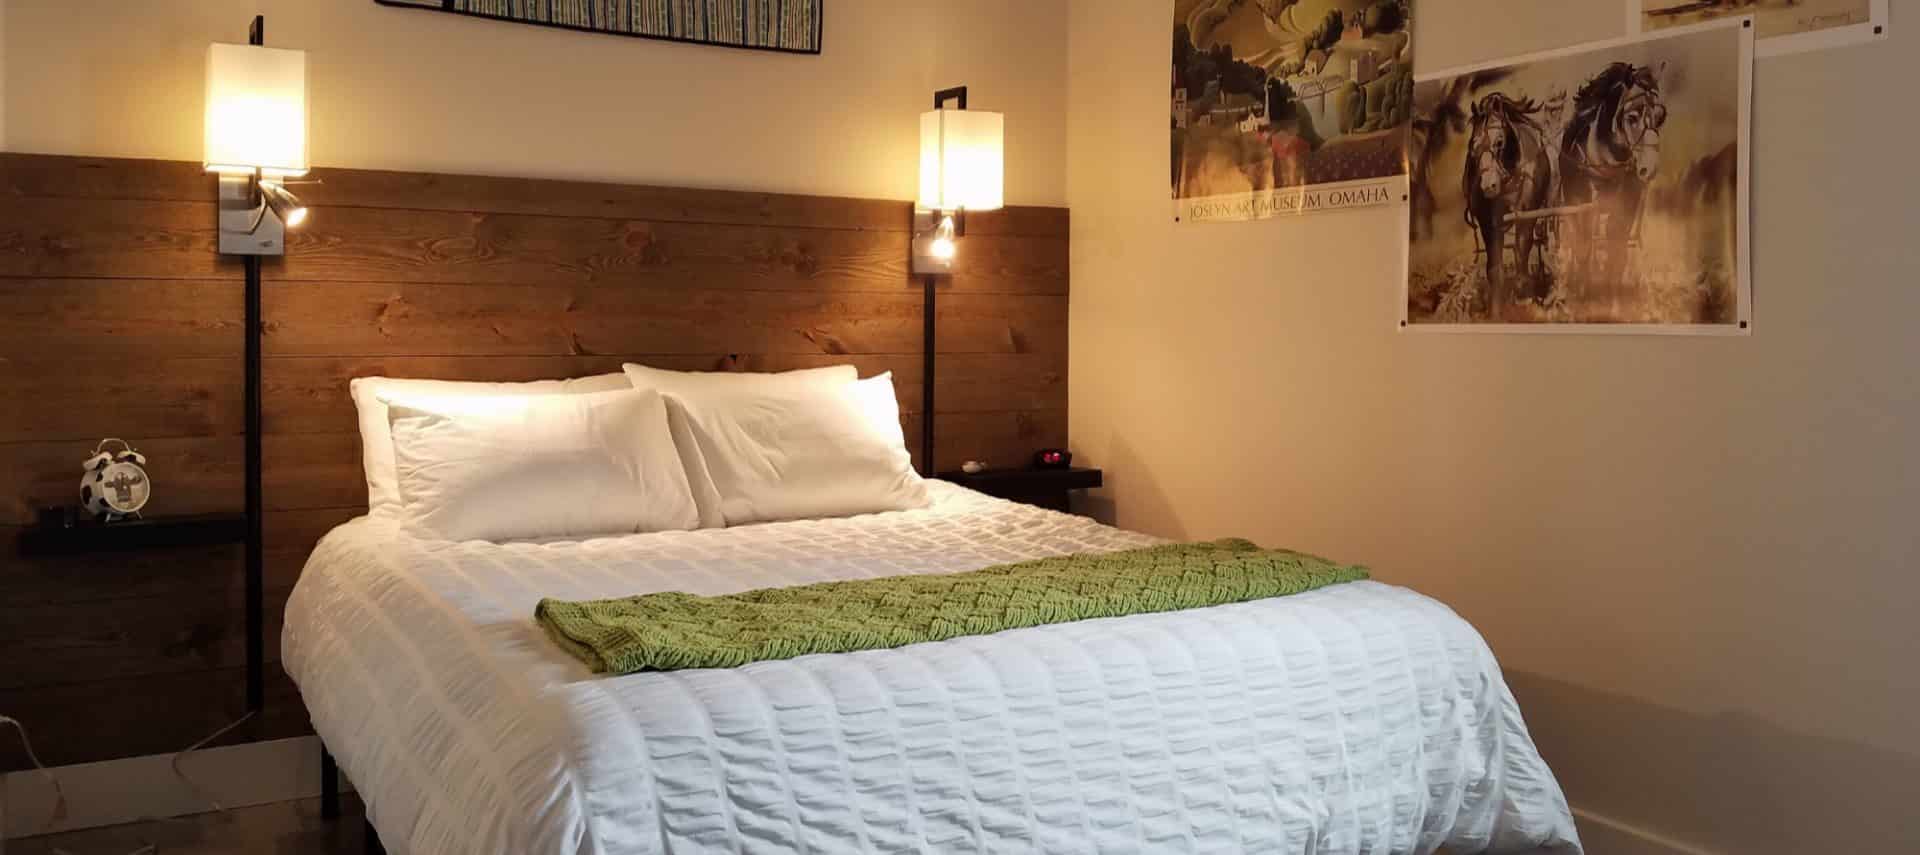 Bed with white bedding and green blanket, dark wooden slats on wall as accent and headboard, wall sconces, and artwork on the walls